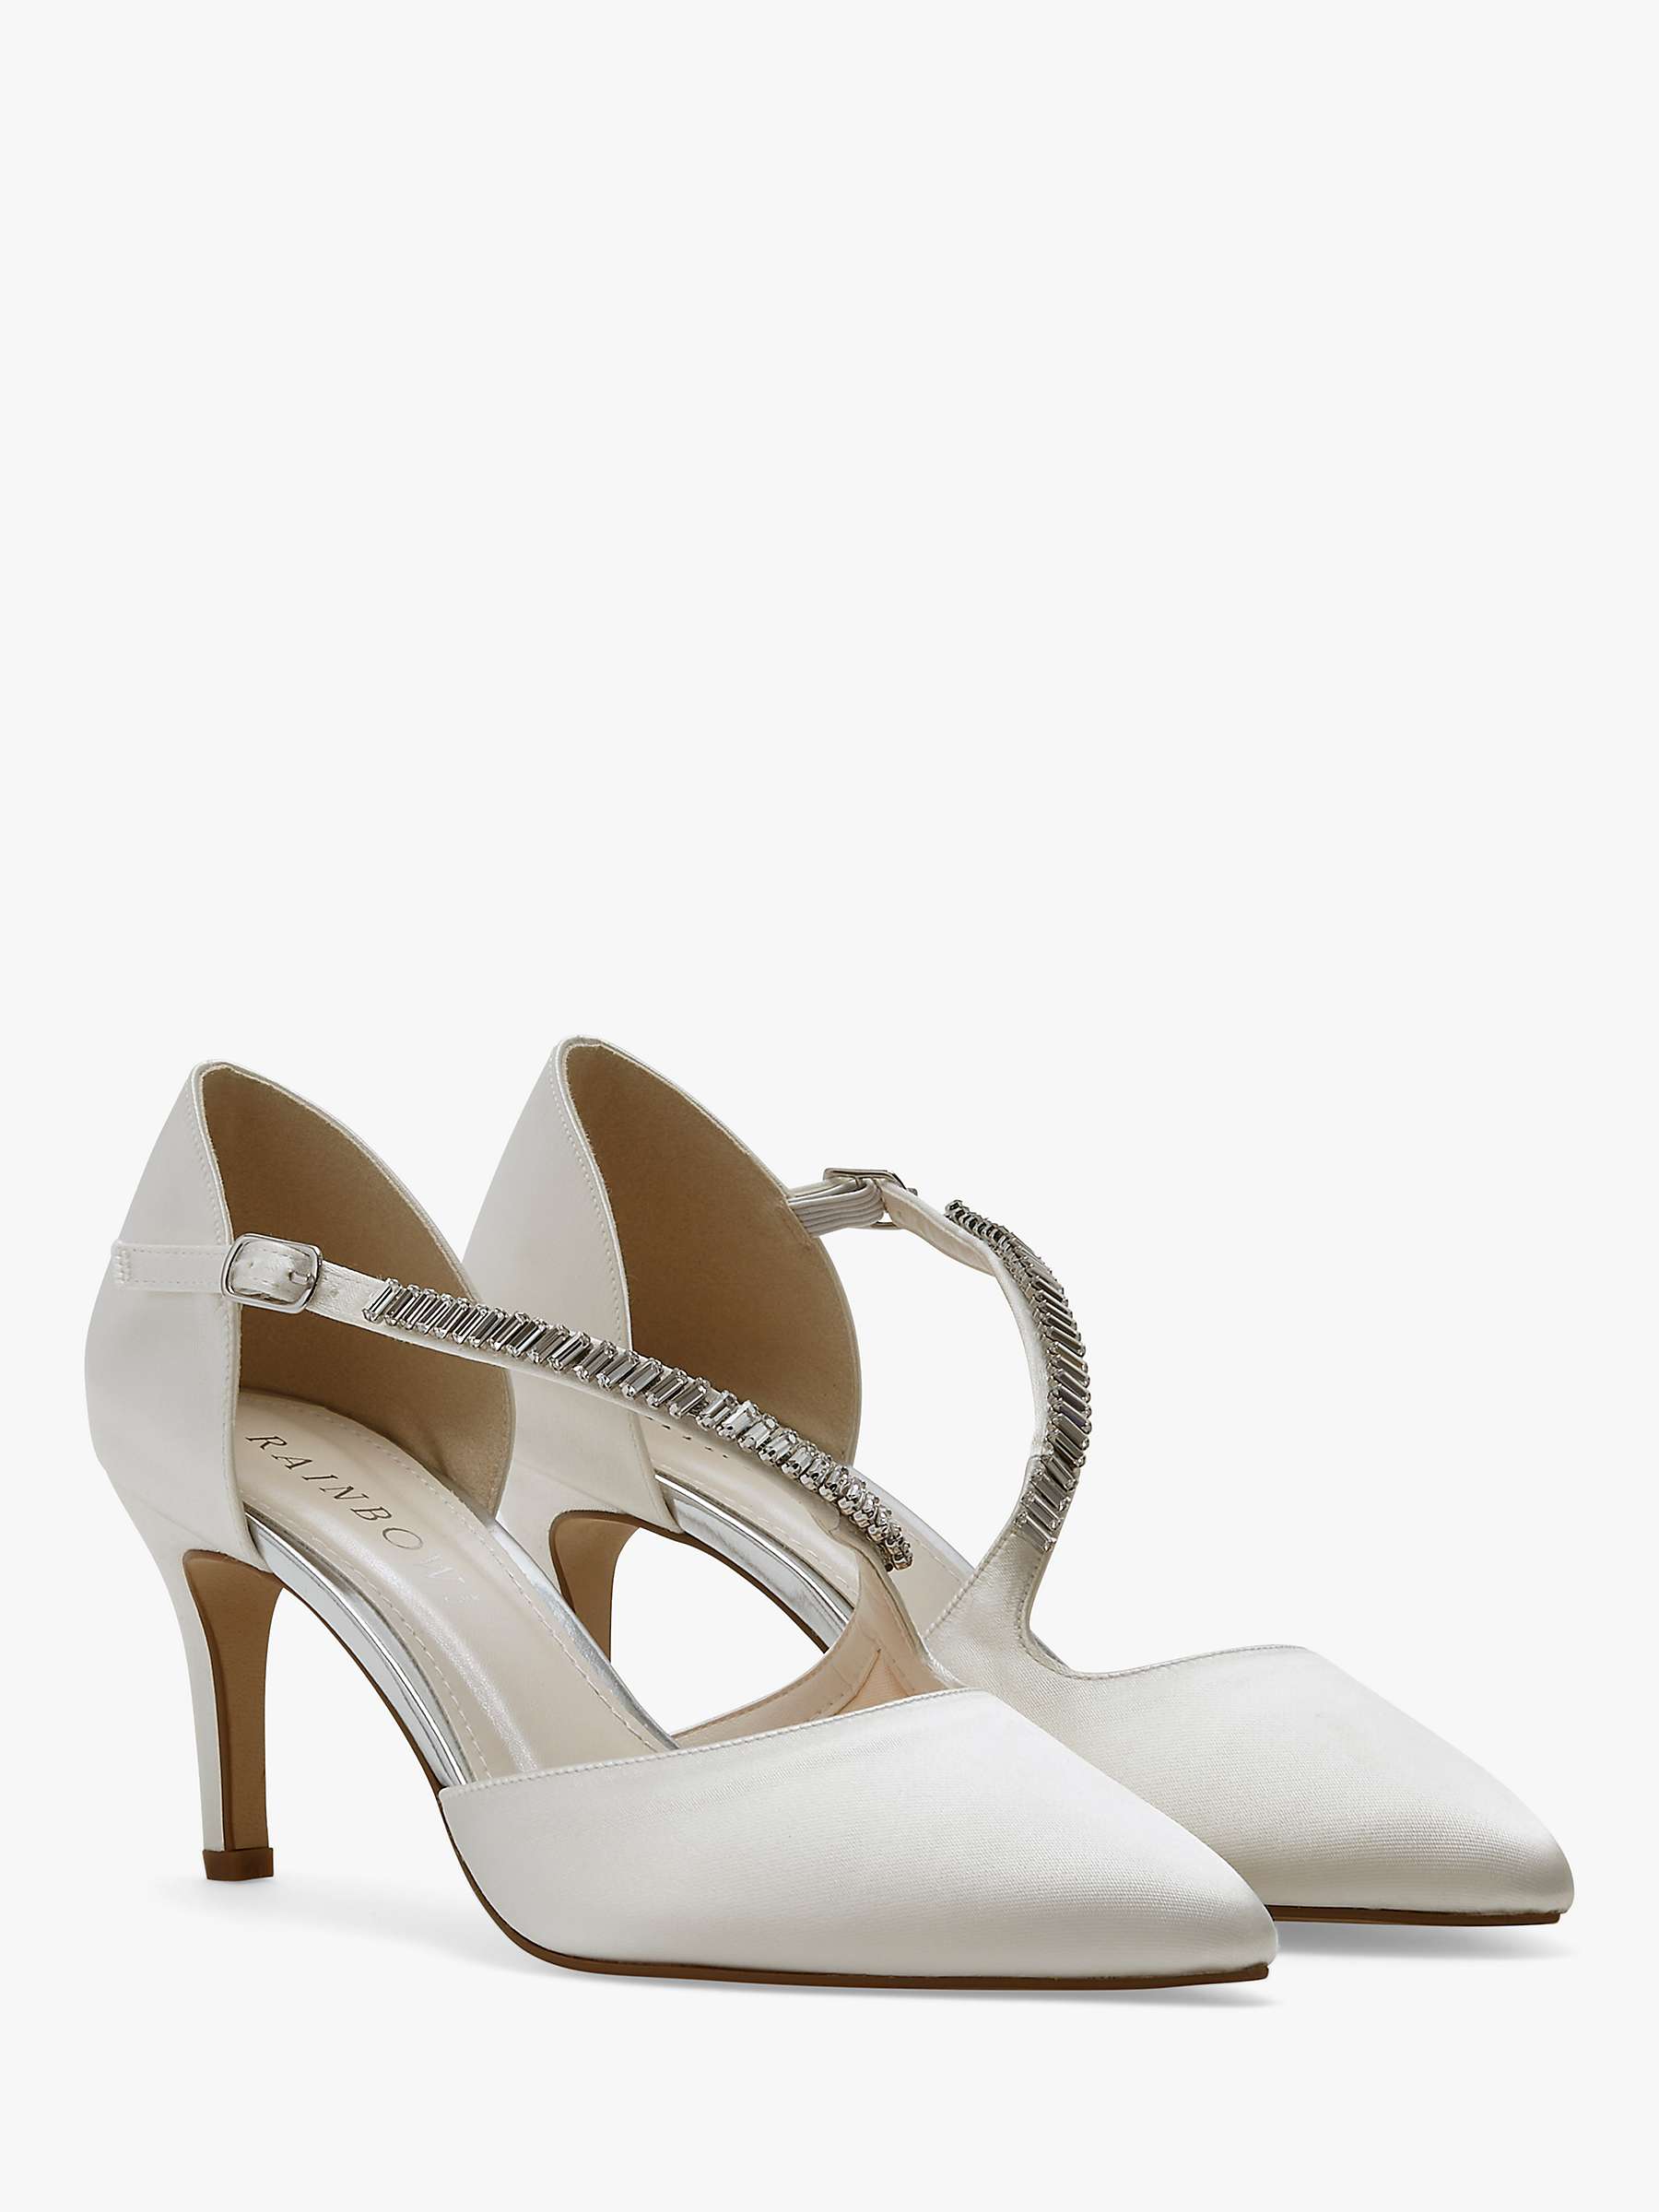 Buy Rainbow Club Raven Crystal Satin Court Shoes, Ivory Satin Online at johnlewis.com